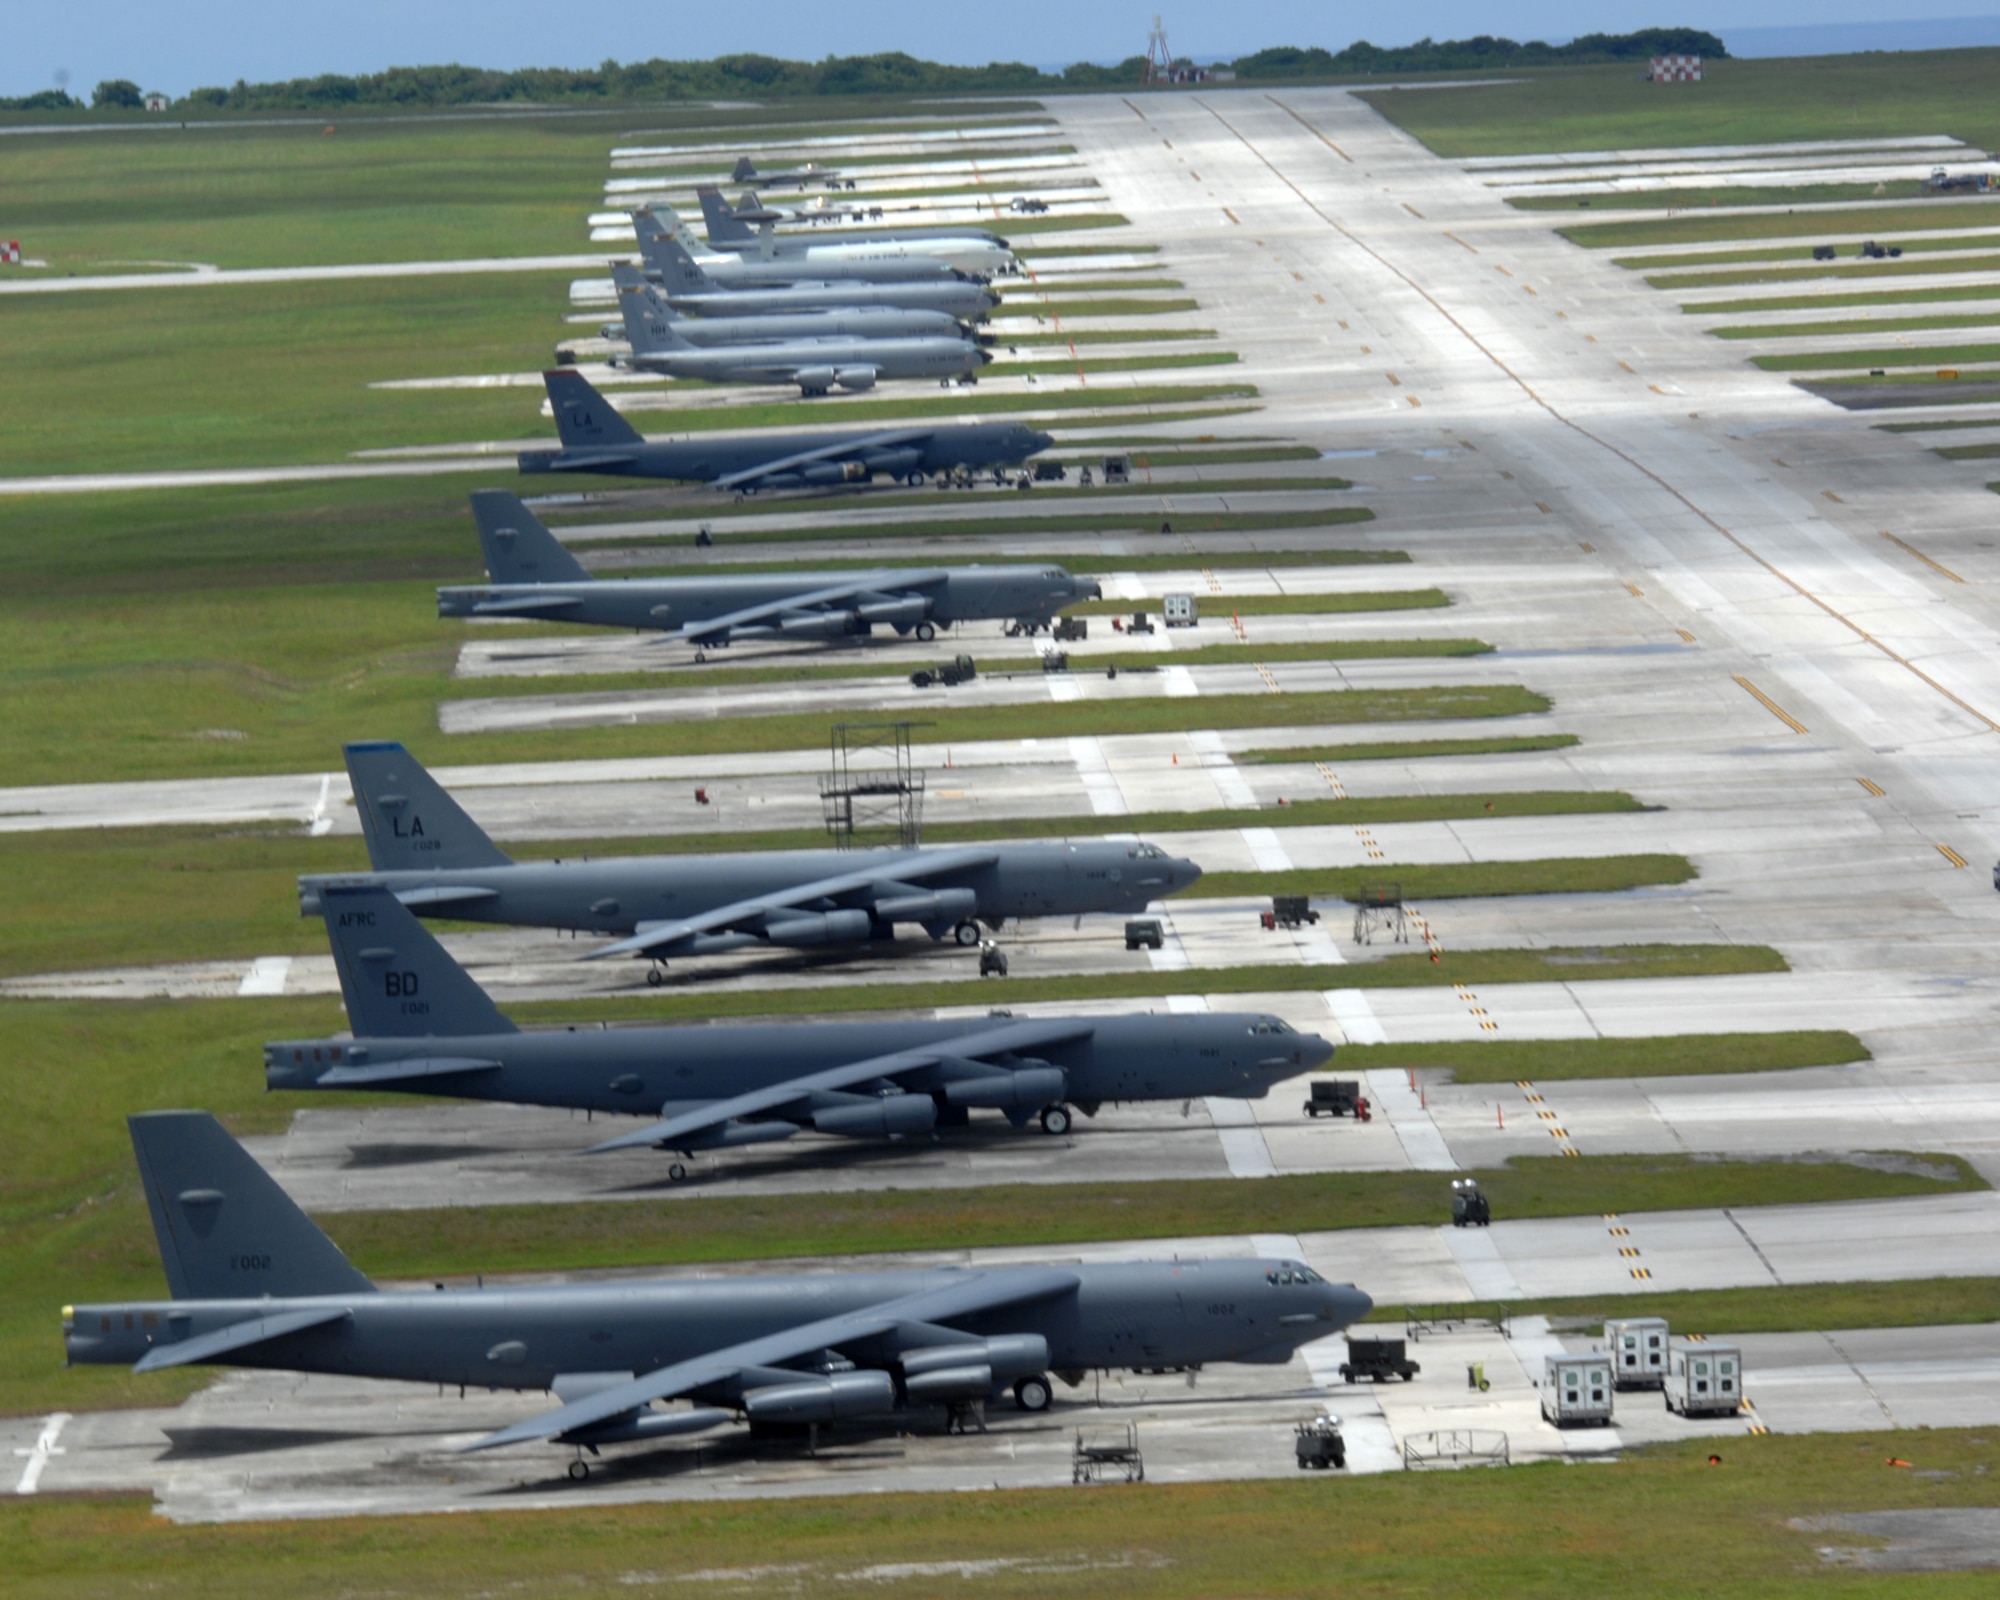 Air Force fighters, bombers, tankers and air control aircraft occupy the flightline at Andersen Air Force Base, Guam, Tuesday. The aircraft, deployed from several Air Force bases, are here to promote regional security and stability in the region.  By maintaining a continuous forward presence and conducting joint exercises, the Pacific Air Force is able to foster improved relations and interoperability with its regional friends and allies. (U.S. Air Force photo by Airman 1St Class Cory Todd)